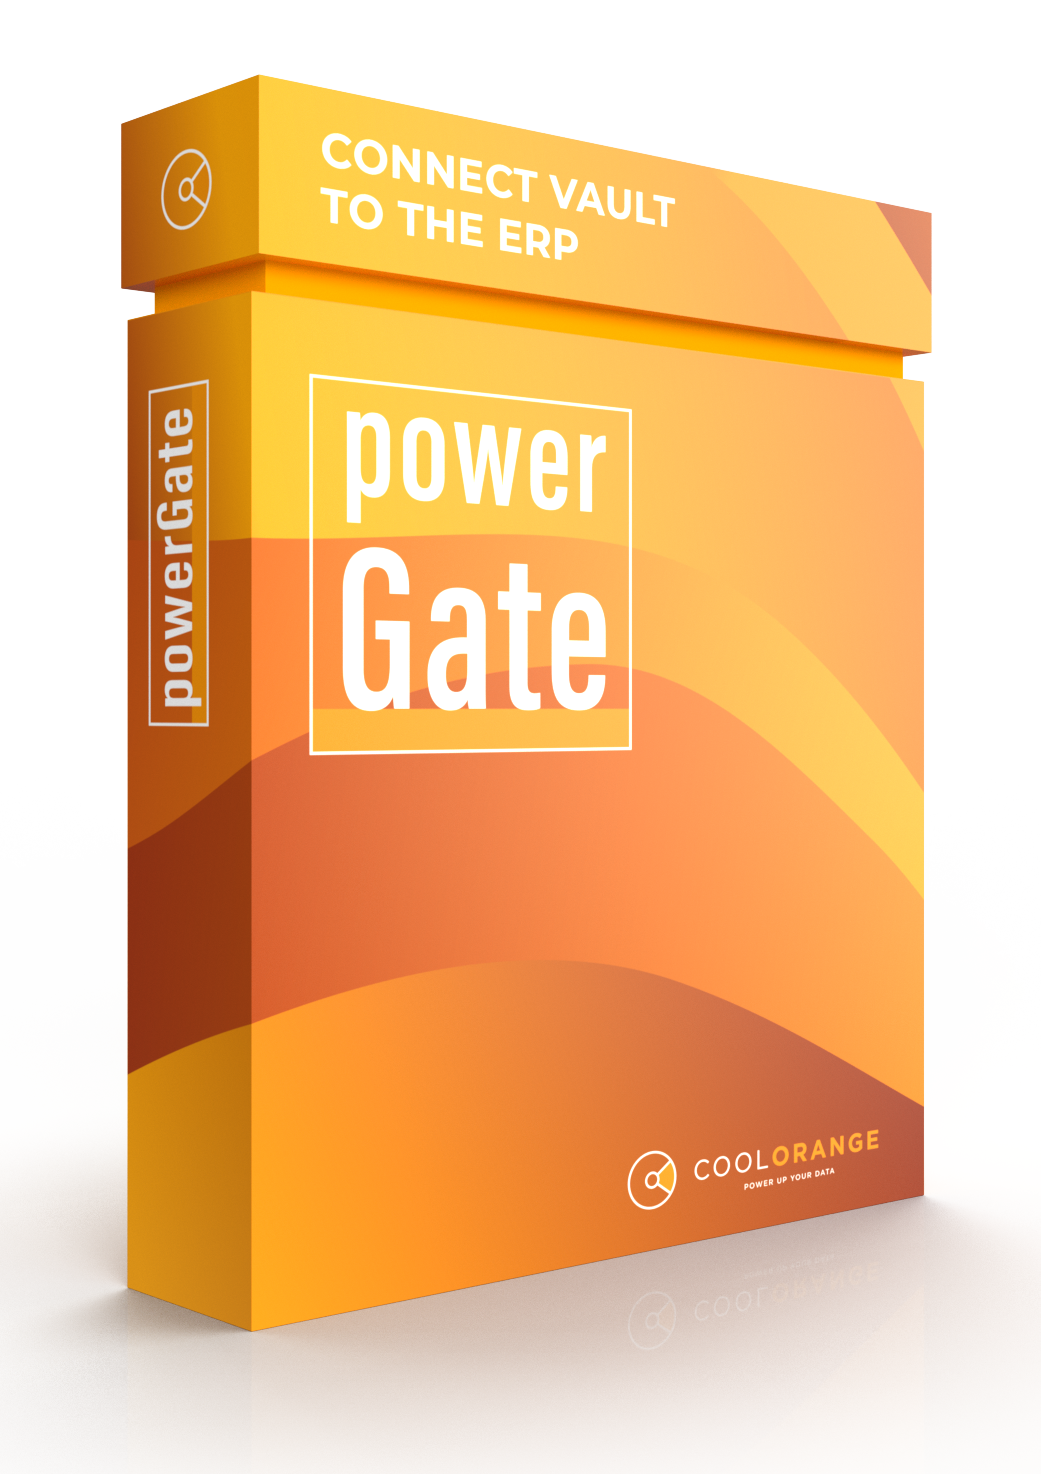 powergate connects autodesk vault to any erp or plm